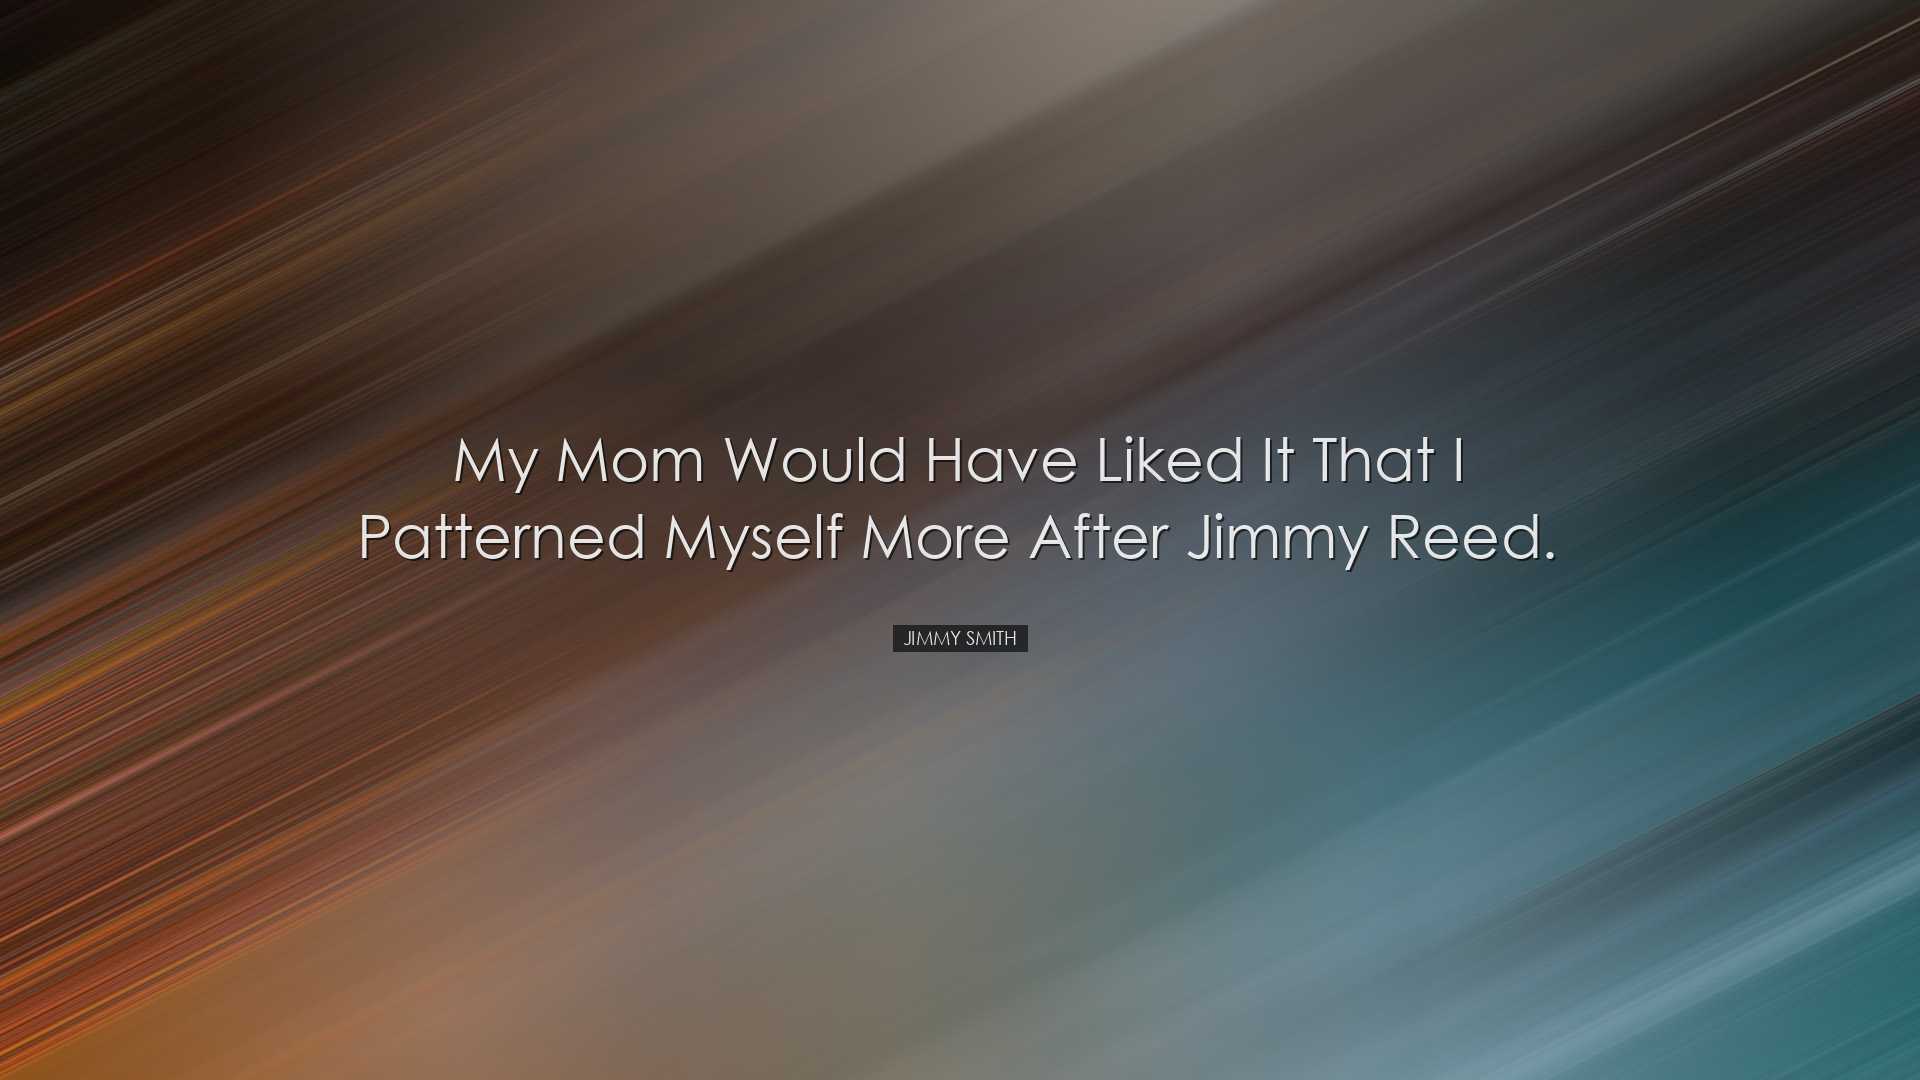 My mom would have liked it that I patterned myself more after Jimm